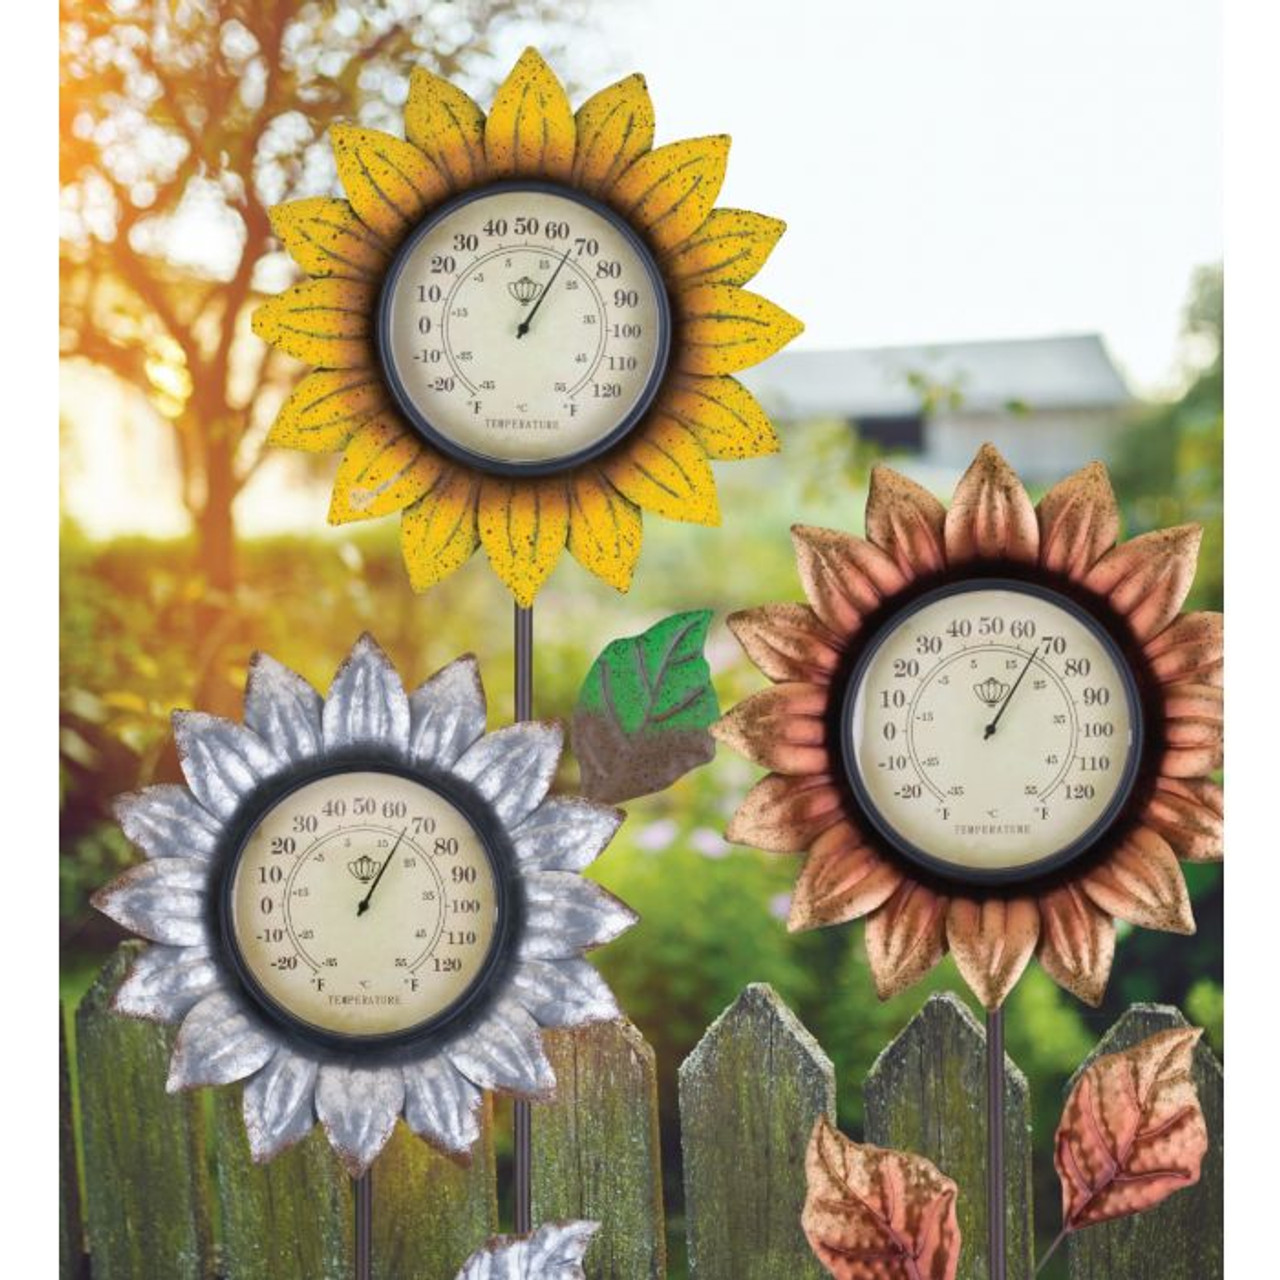 https://cdn11.bigcommerce.com/s-s8dcj5rpmy/images/stencil/1280x1280/products/3591/9247/12327-3_Flower_Thermometer_Stake_-_Yellow__35863.1648498395.jpg?c=2?imbypass=on